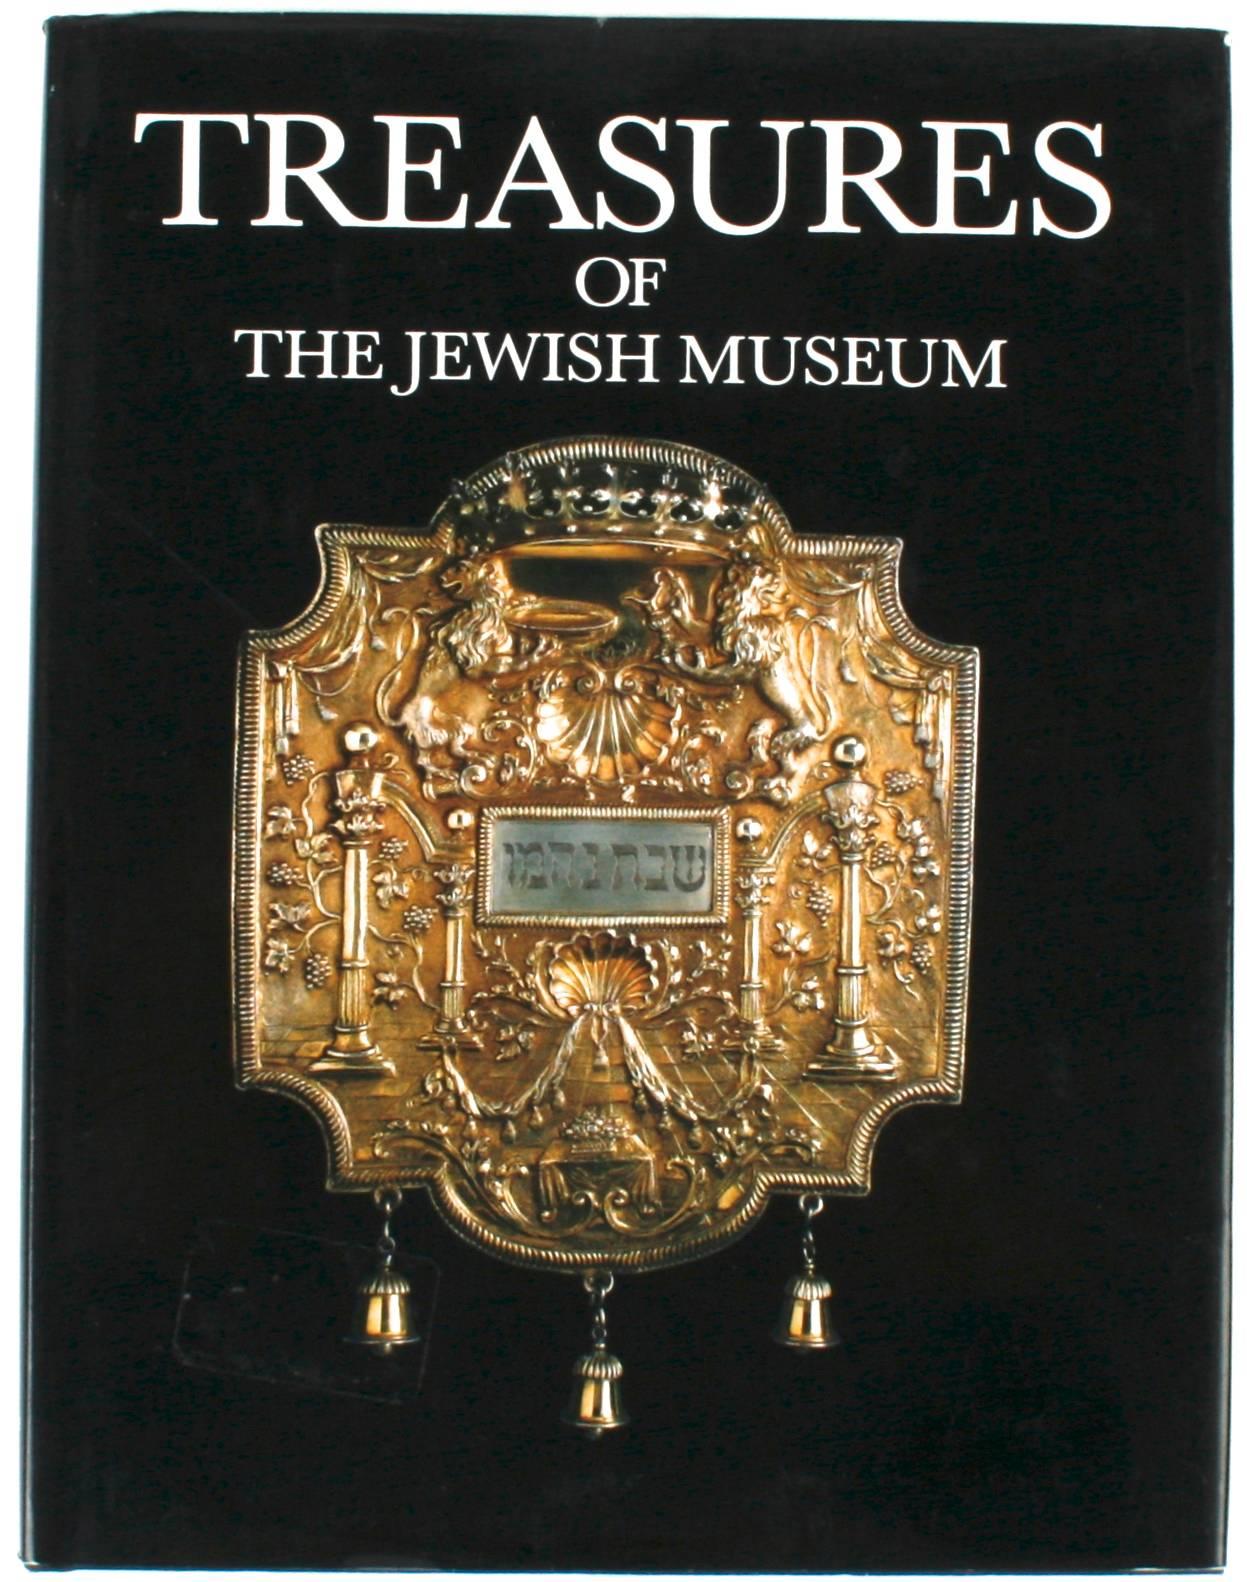 Four books on Jewish Art. Treasures of The Jewish Museum. New York: University Books, 1986. First edition hardcover with dust jacket. 210 pp. An art book on the extensive collections of the Jewish Museum. Jewish Ceremonial Art and Religious